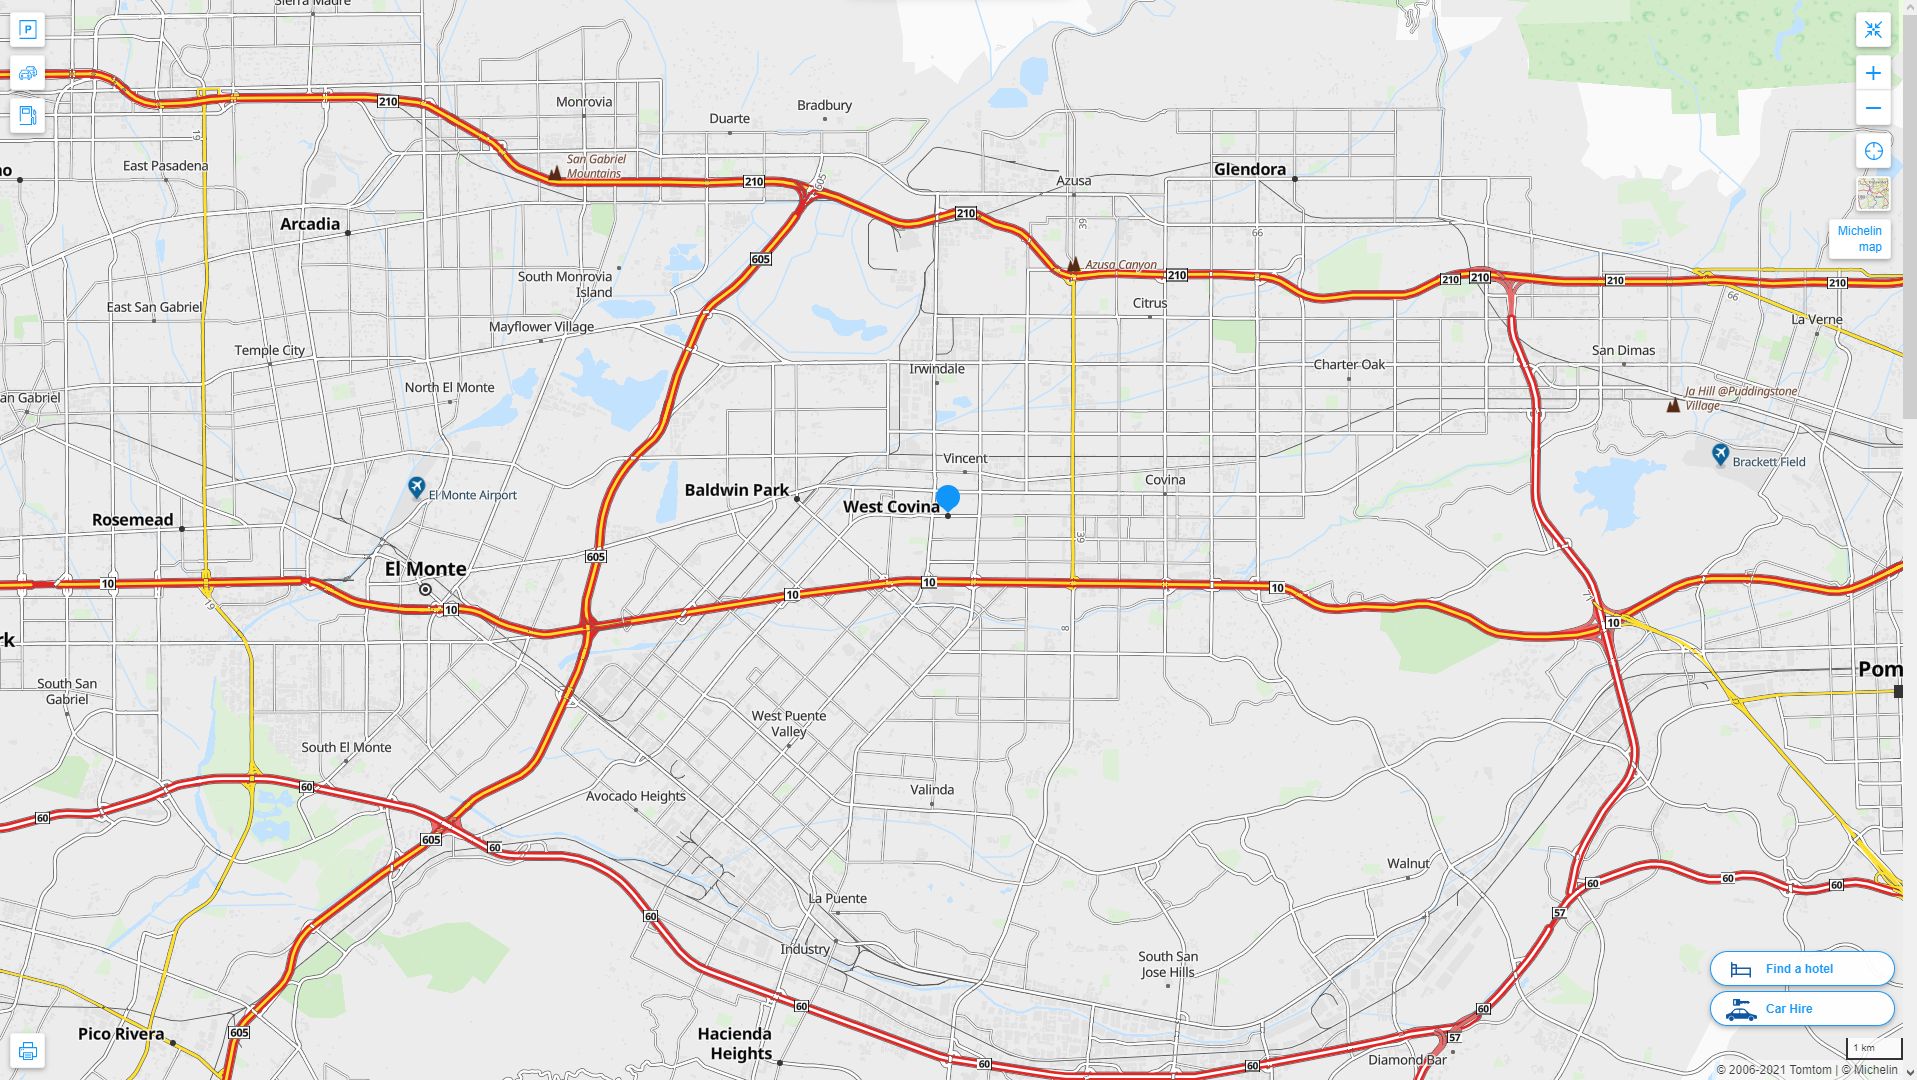 West Covina California Highway and Road Map